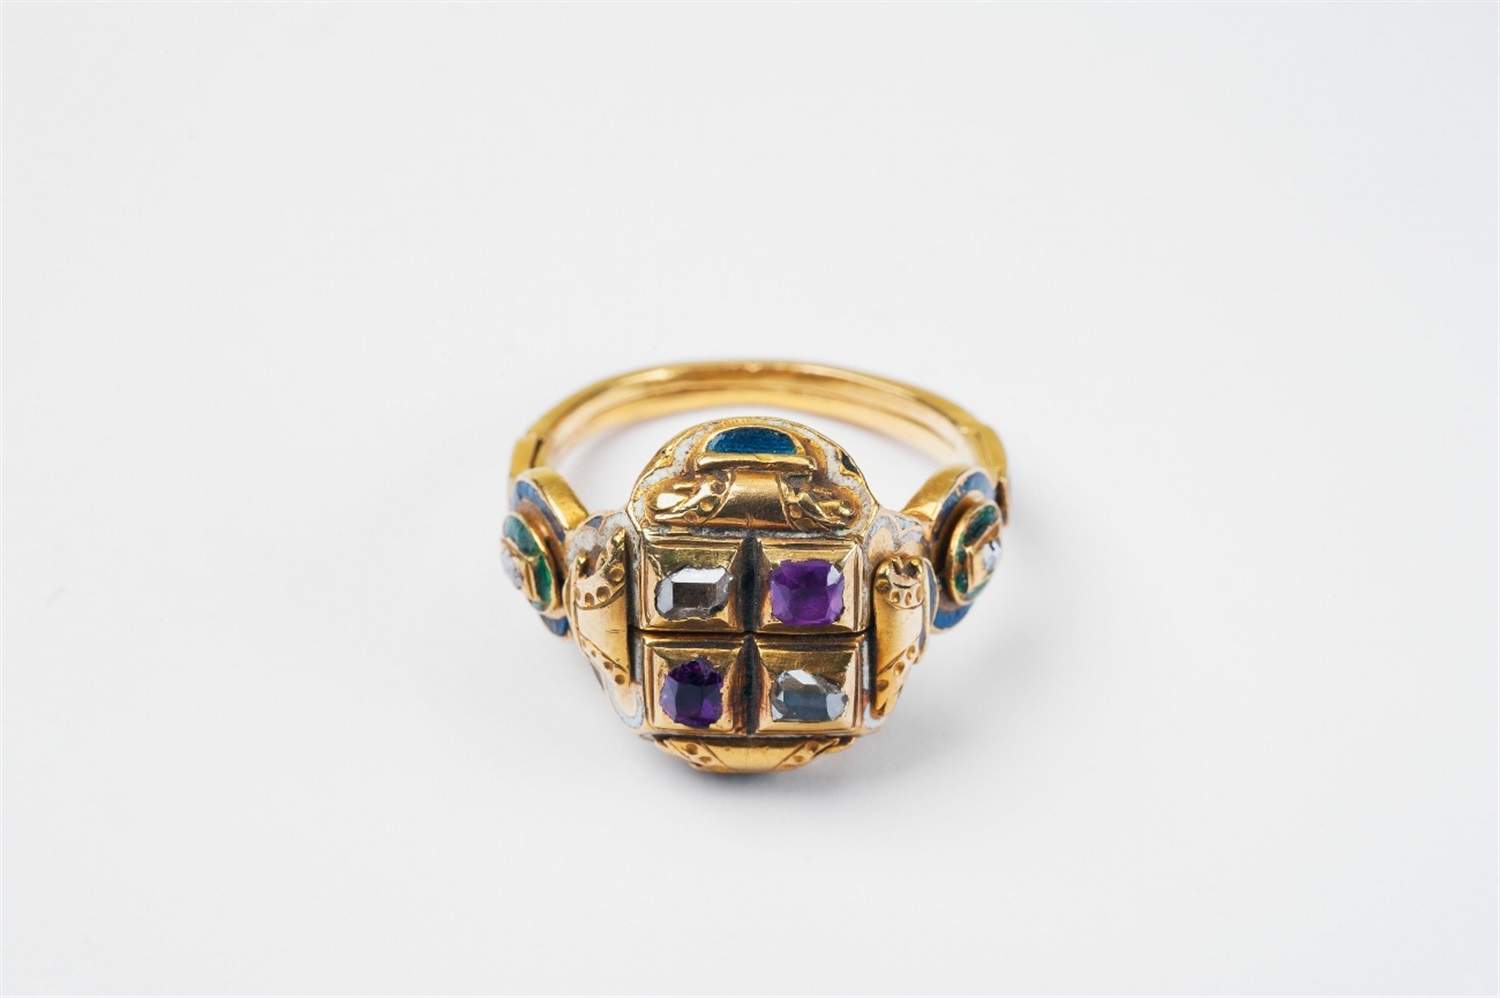 A rare gold, enamel, ruby and diamond "gimmel" ring with memento mori Formed from two connected